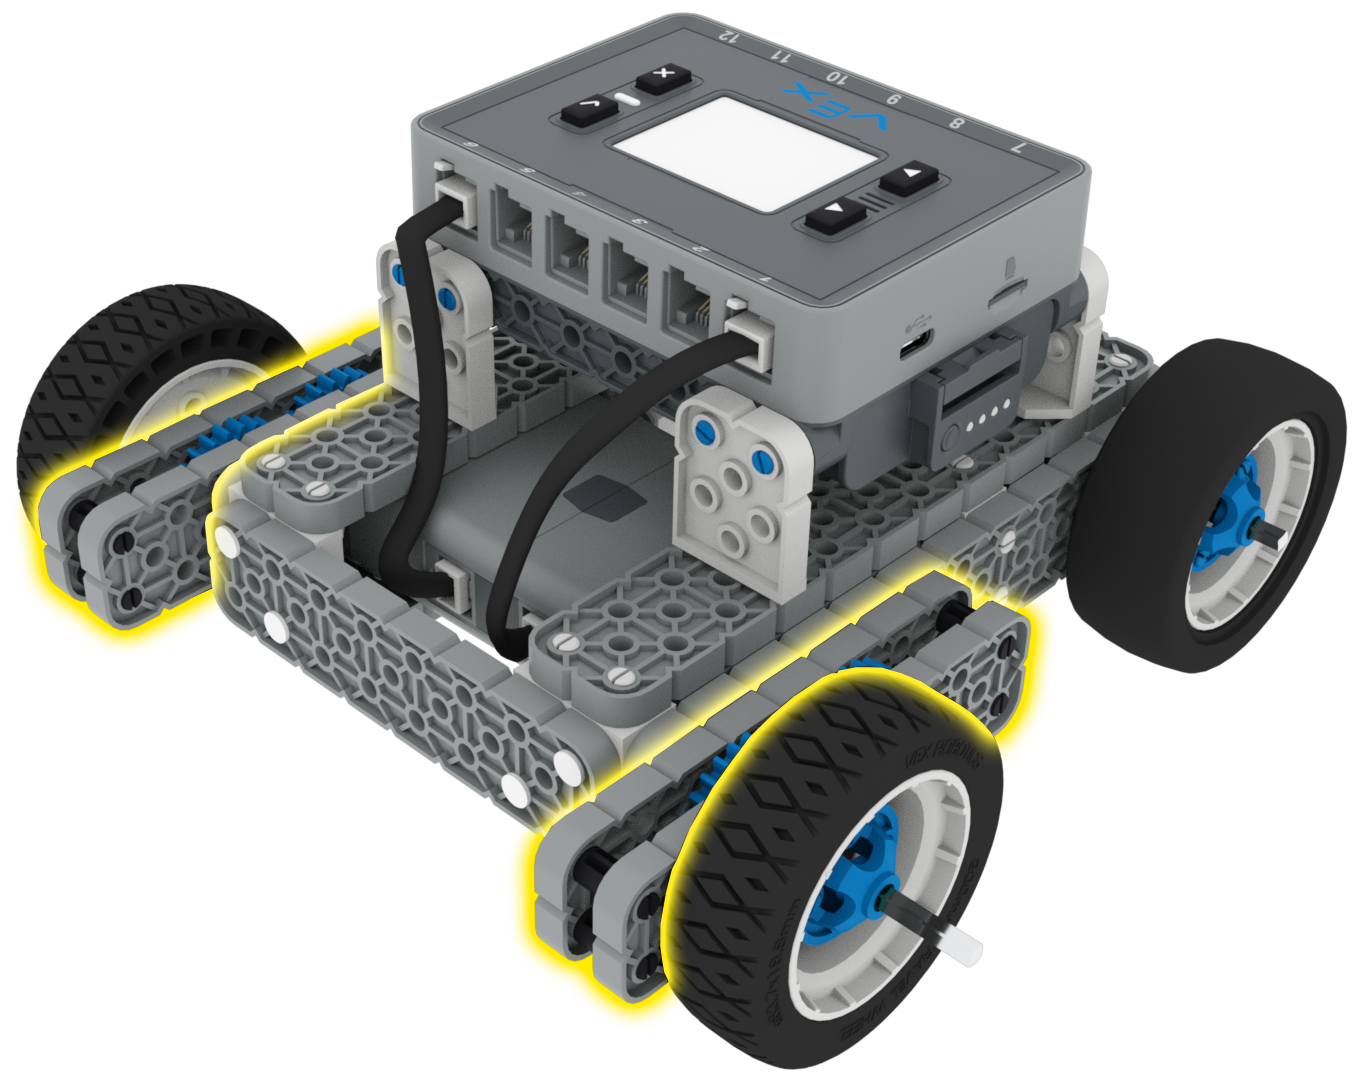 Image of a BaseBot with an example of a gear train addition on the front axle